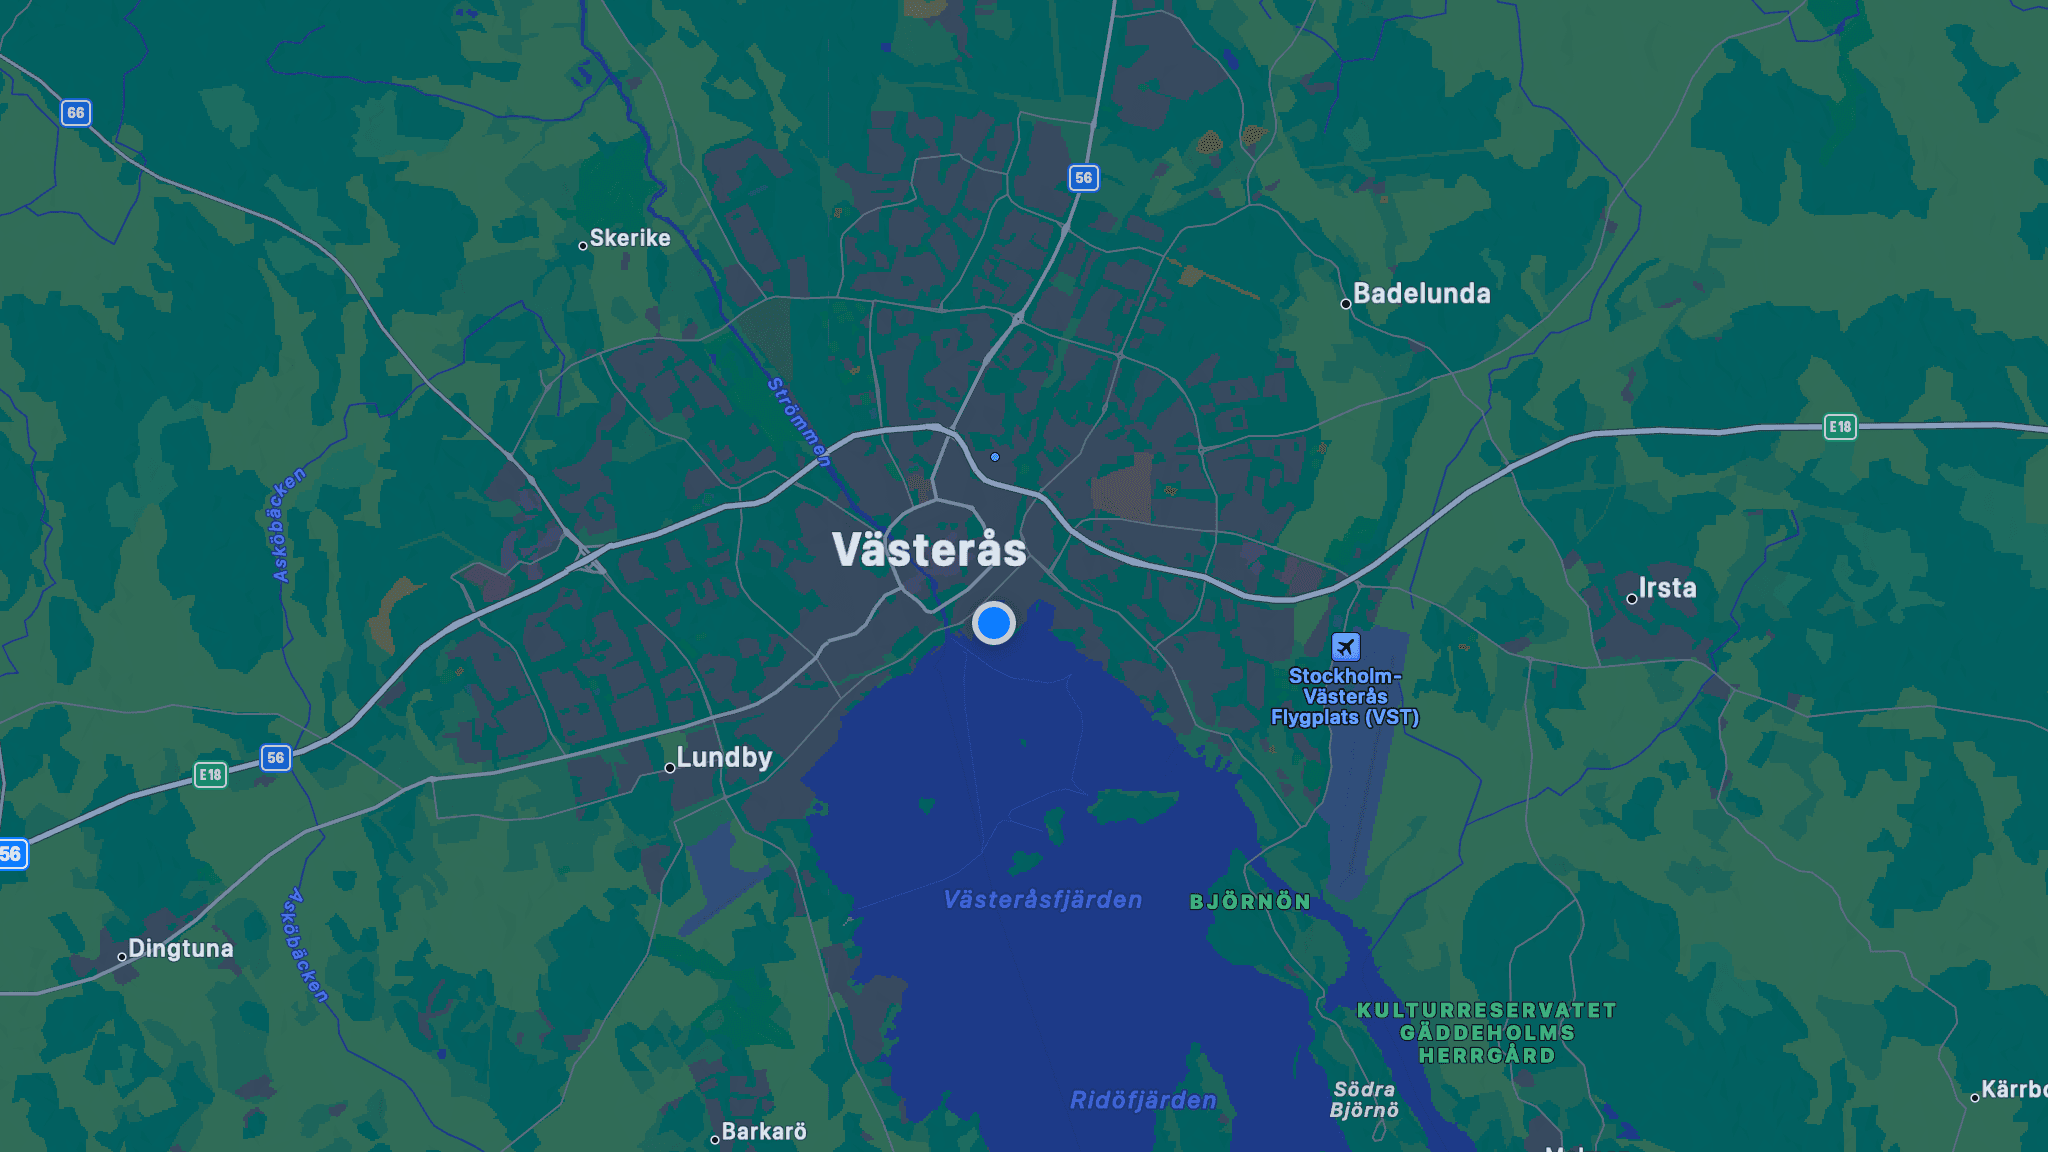 Map of the great Stockholm region